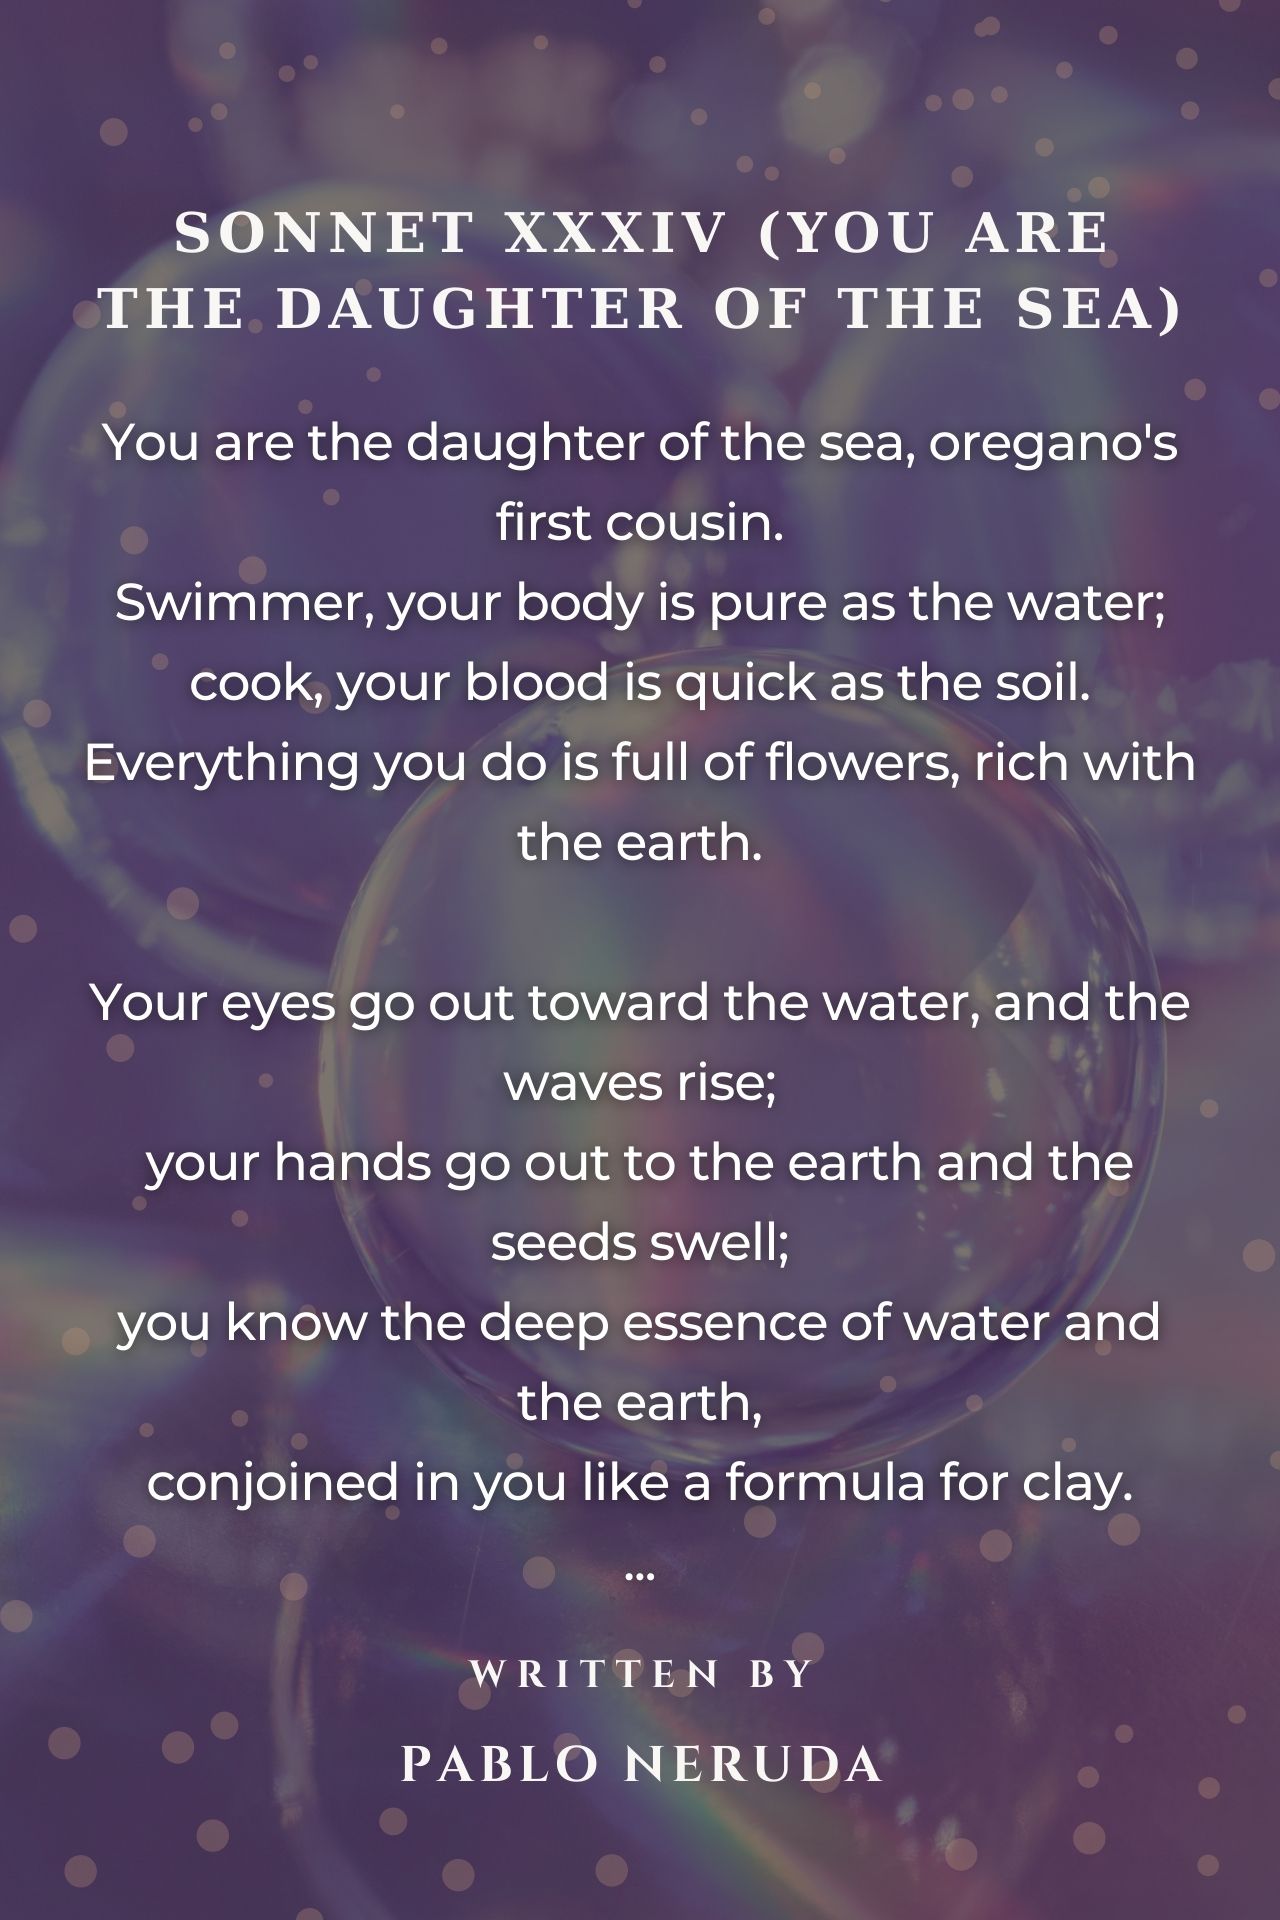 Sonnet Xxxiv (You Are The Daughter Of The Sea)